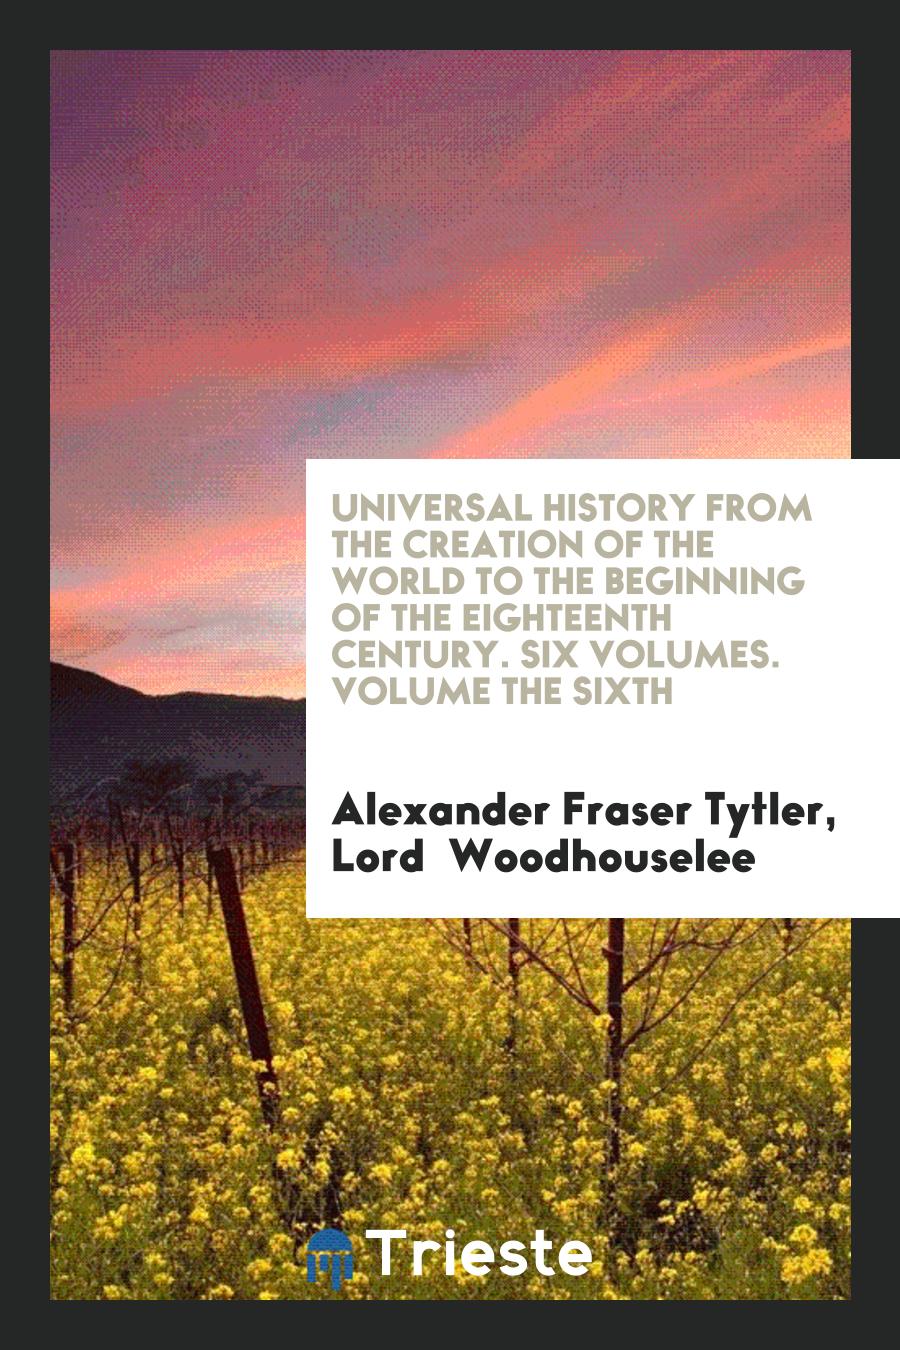 Universal History from the Creation of the World to the Beginning of the Eighteenth Century. Six Volumes. Volume the Sixth